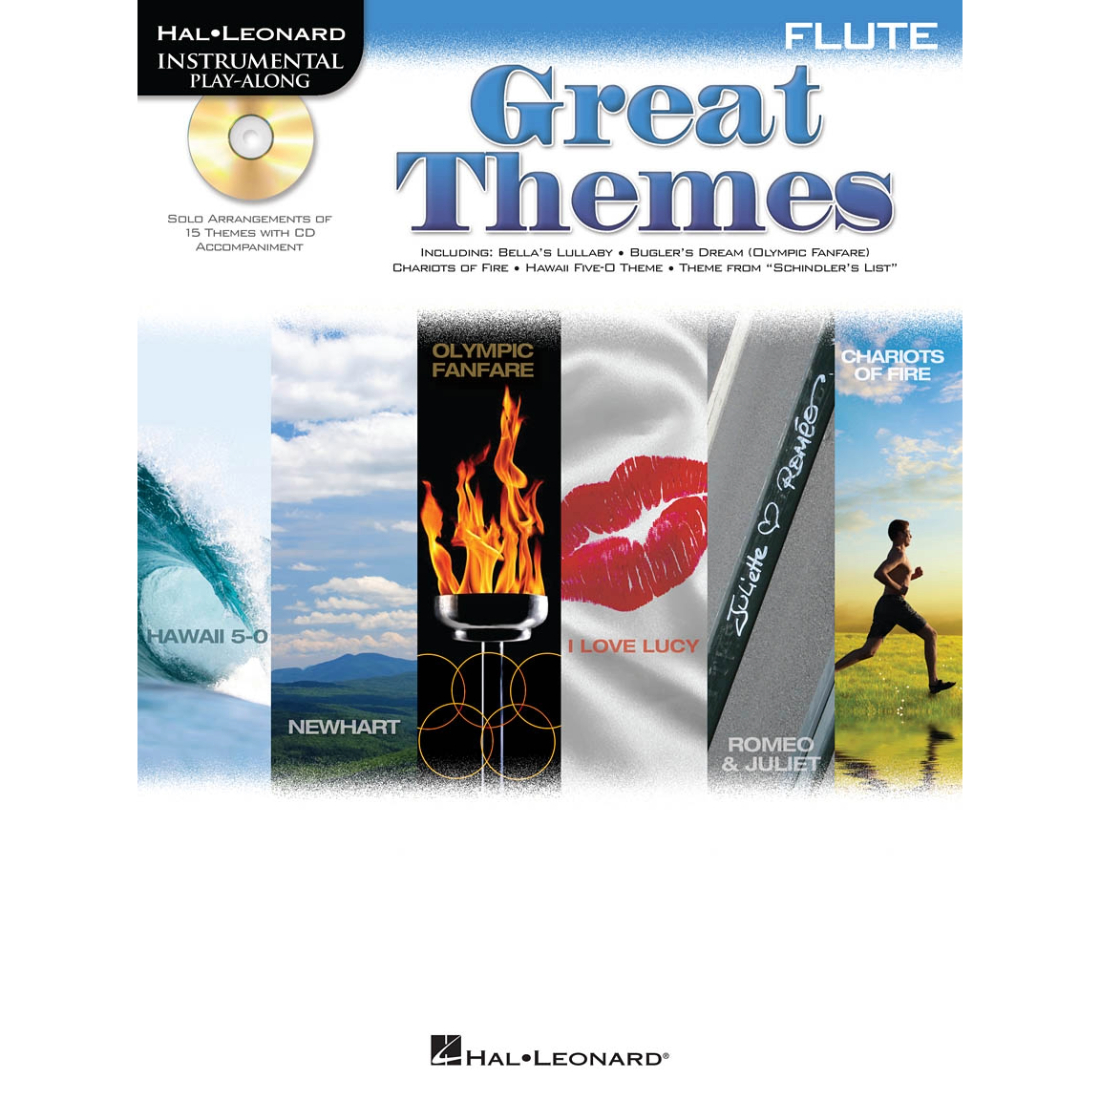 White cover with various images, titled Great Themes